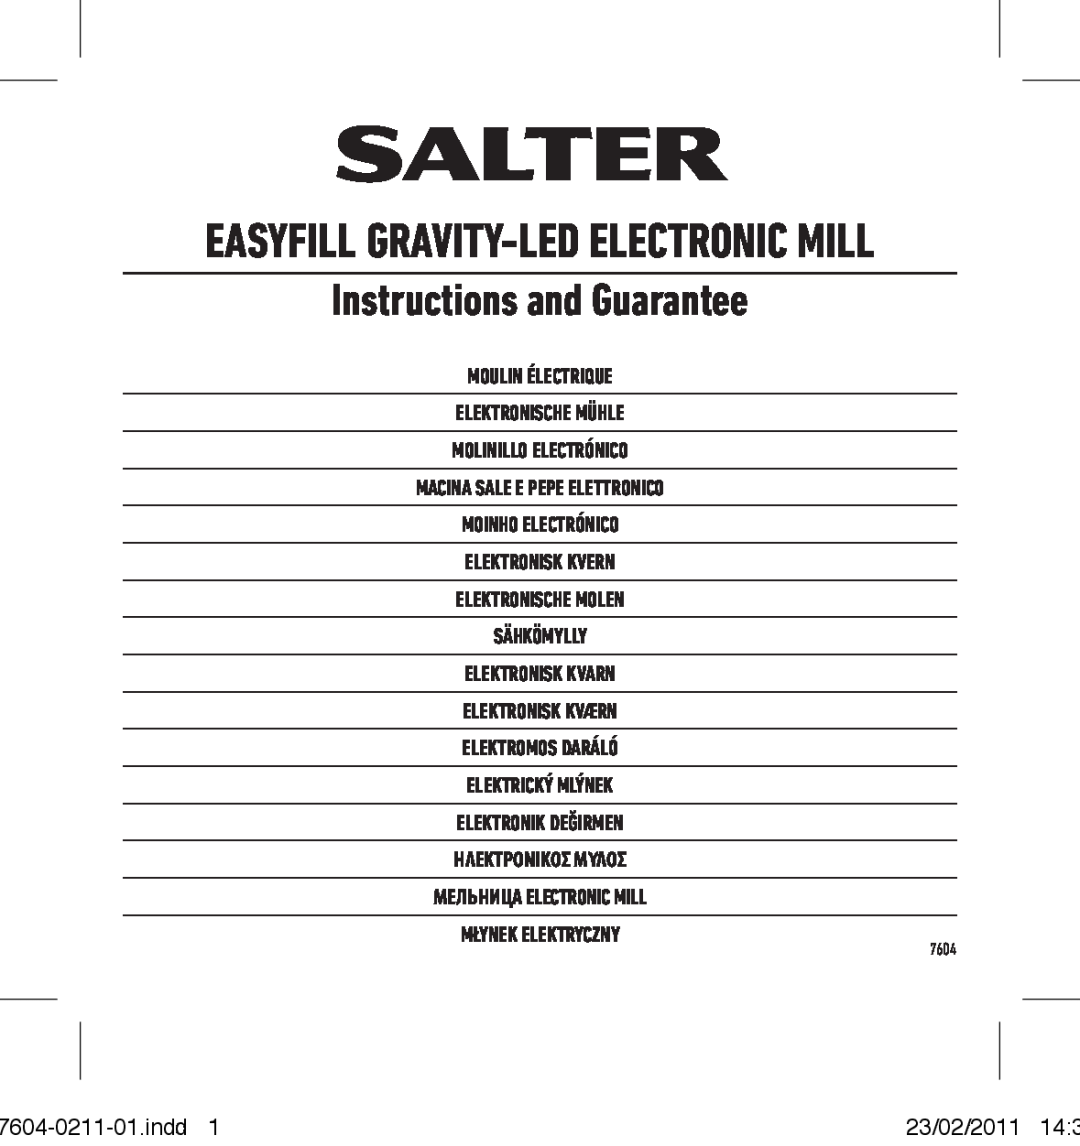 Salter Housewares 7604-0211-01 manual Easyfill Gravity-led Electronic Mill, Instructions and Guarantee 